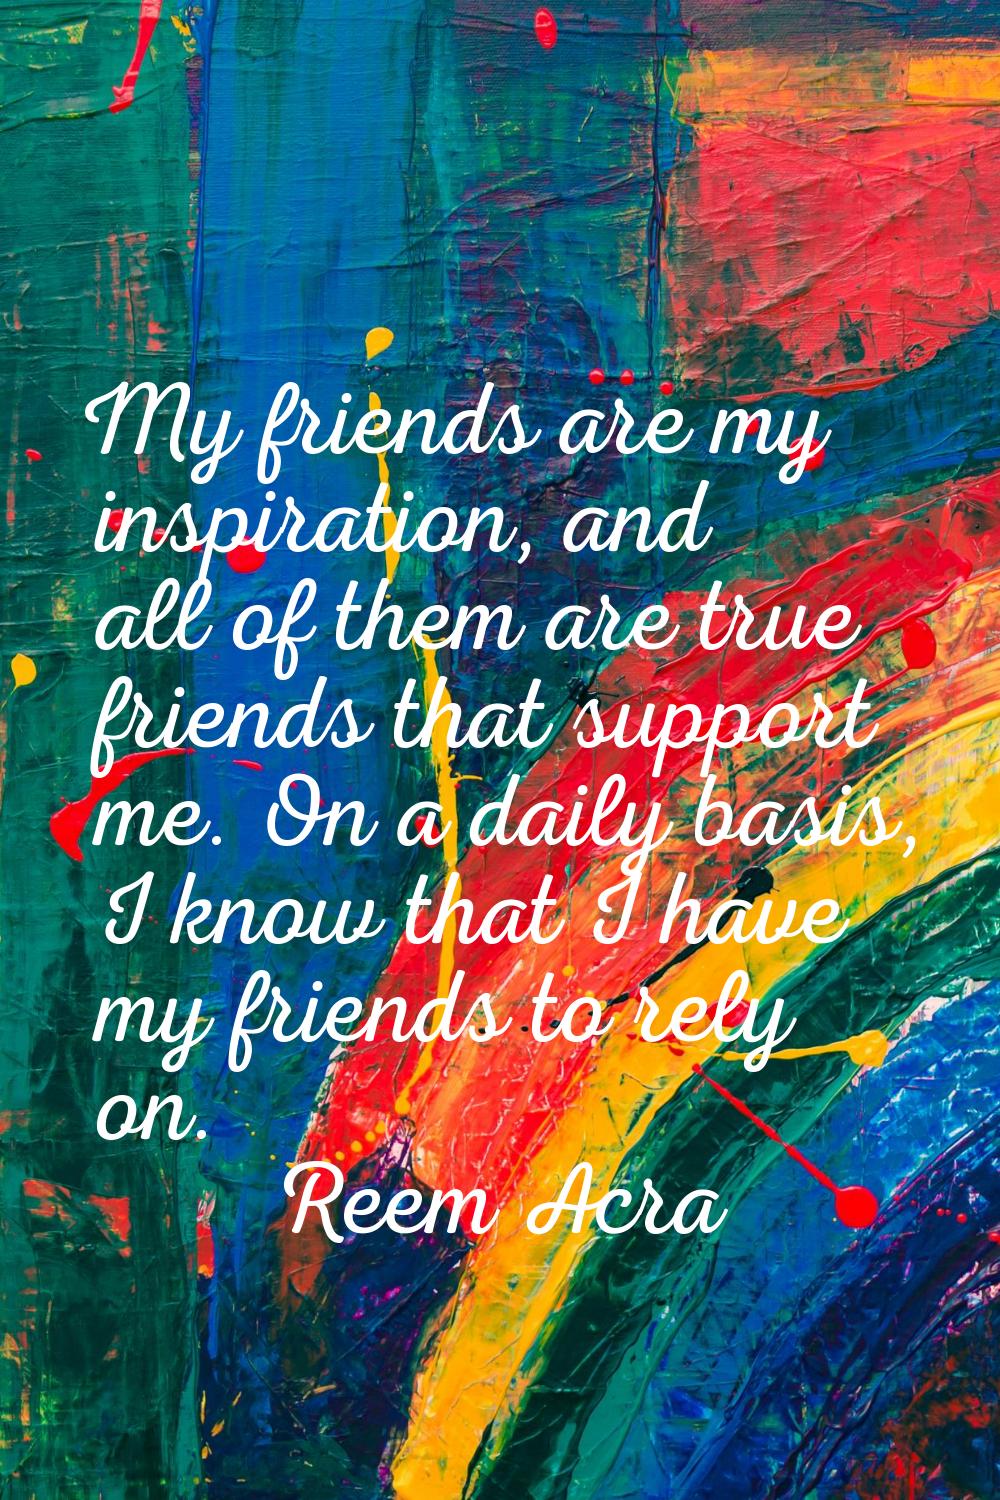 My friends are my inspiration, and all of them are true friends that support me. On a daily basis, 